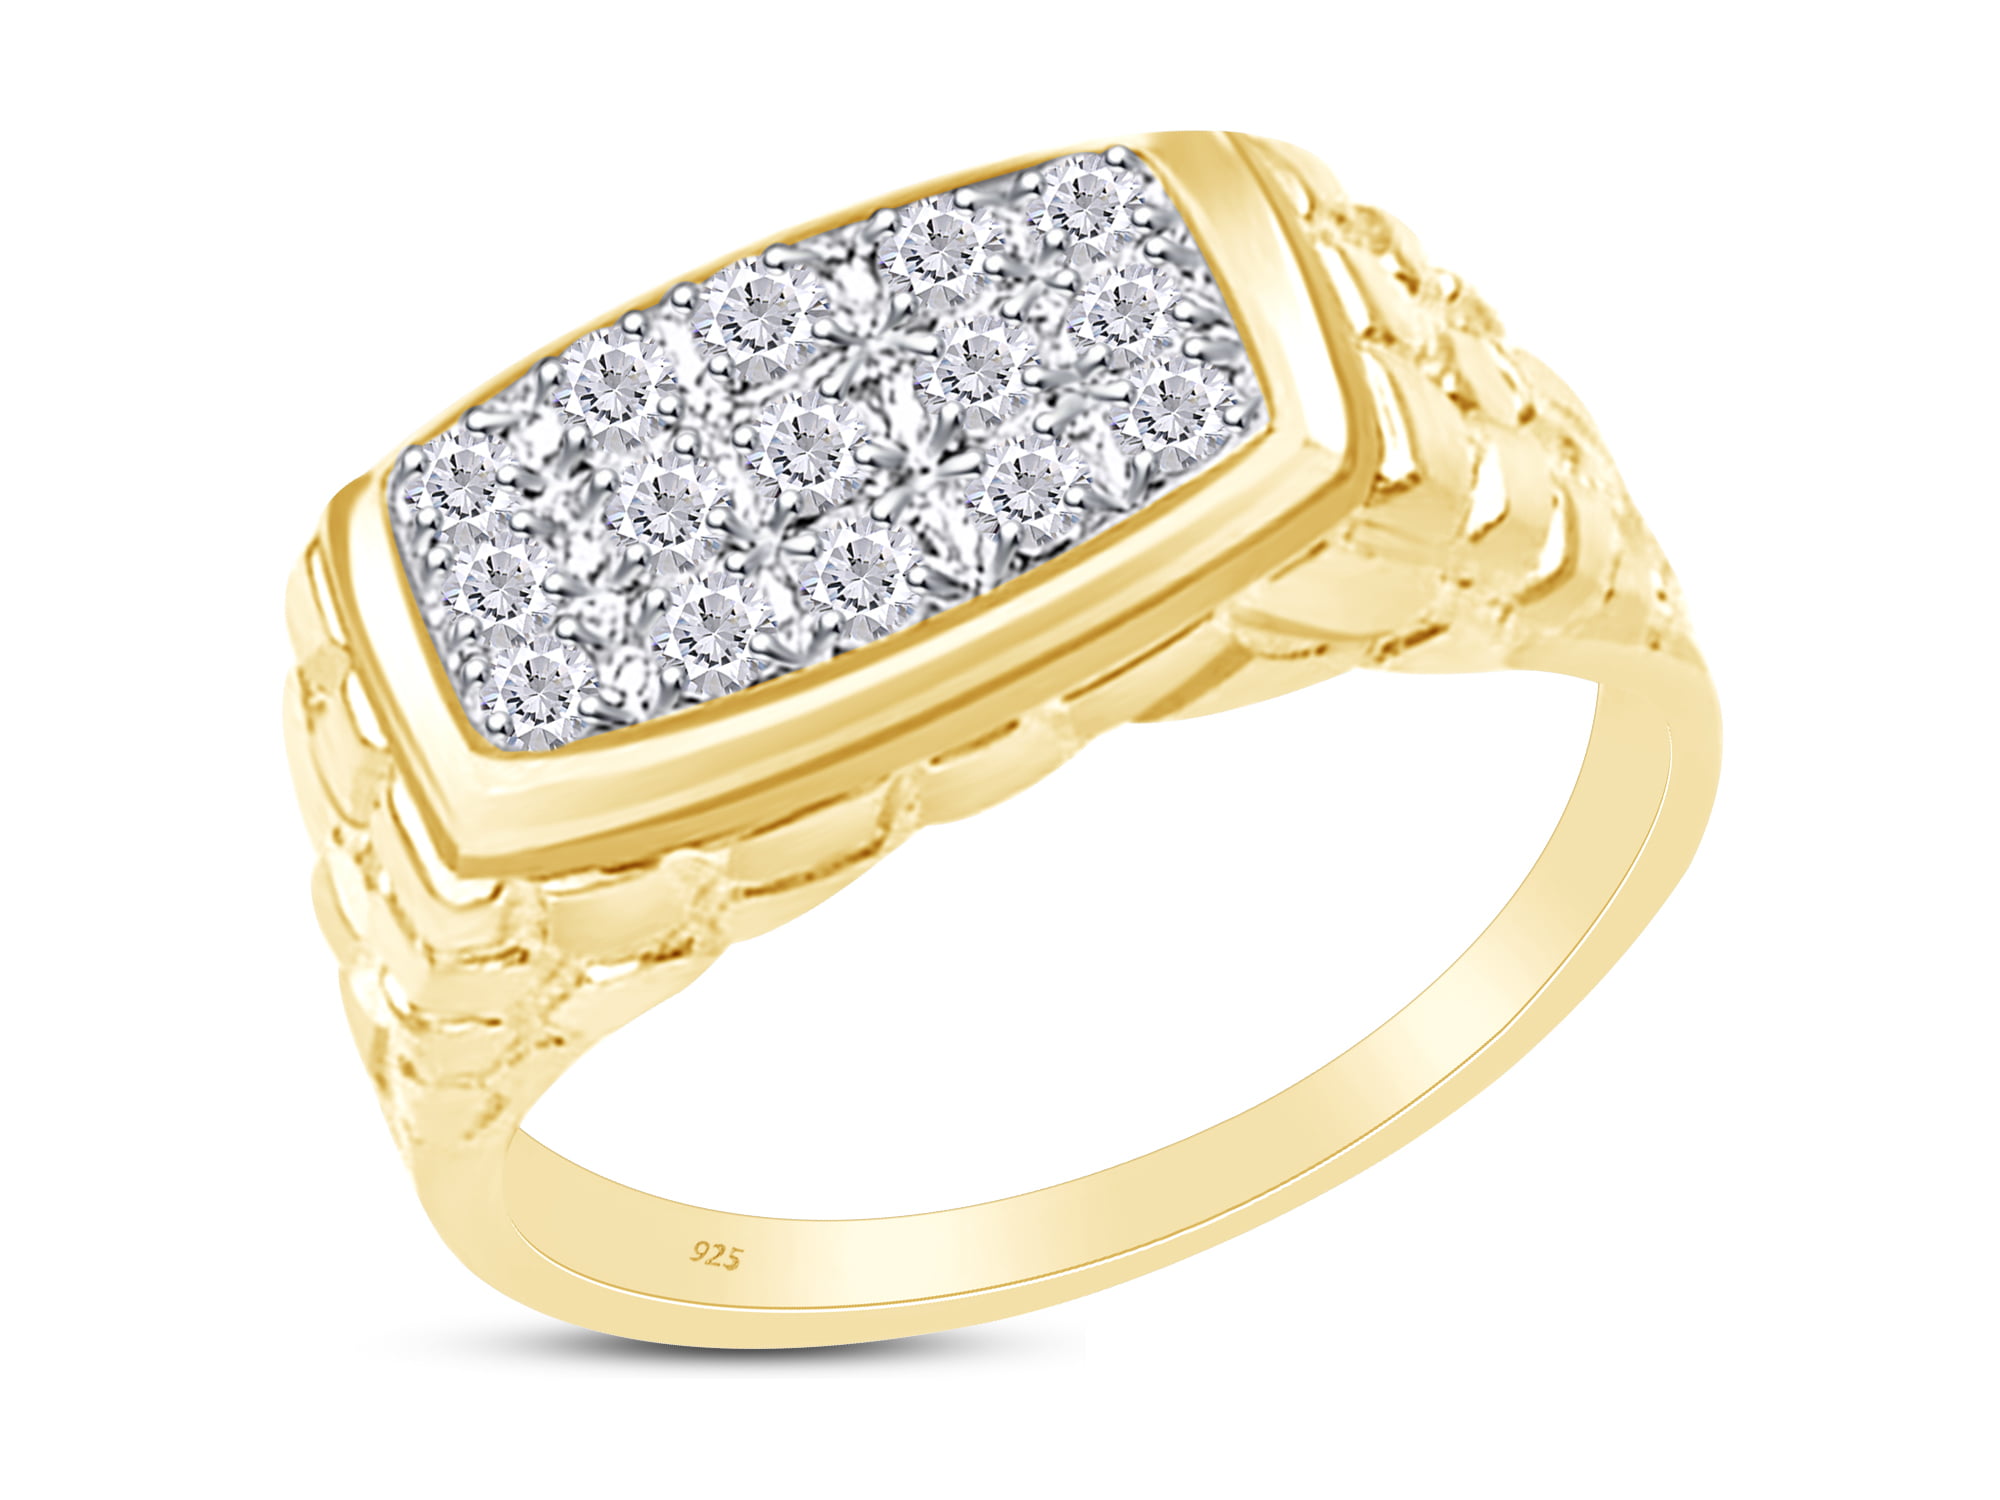 Wishrocks Princess Cut White CZ Mens Ring in 14K Gold Over Sterling Silver Gift for Fathers Day